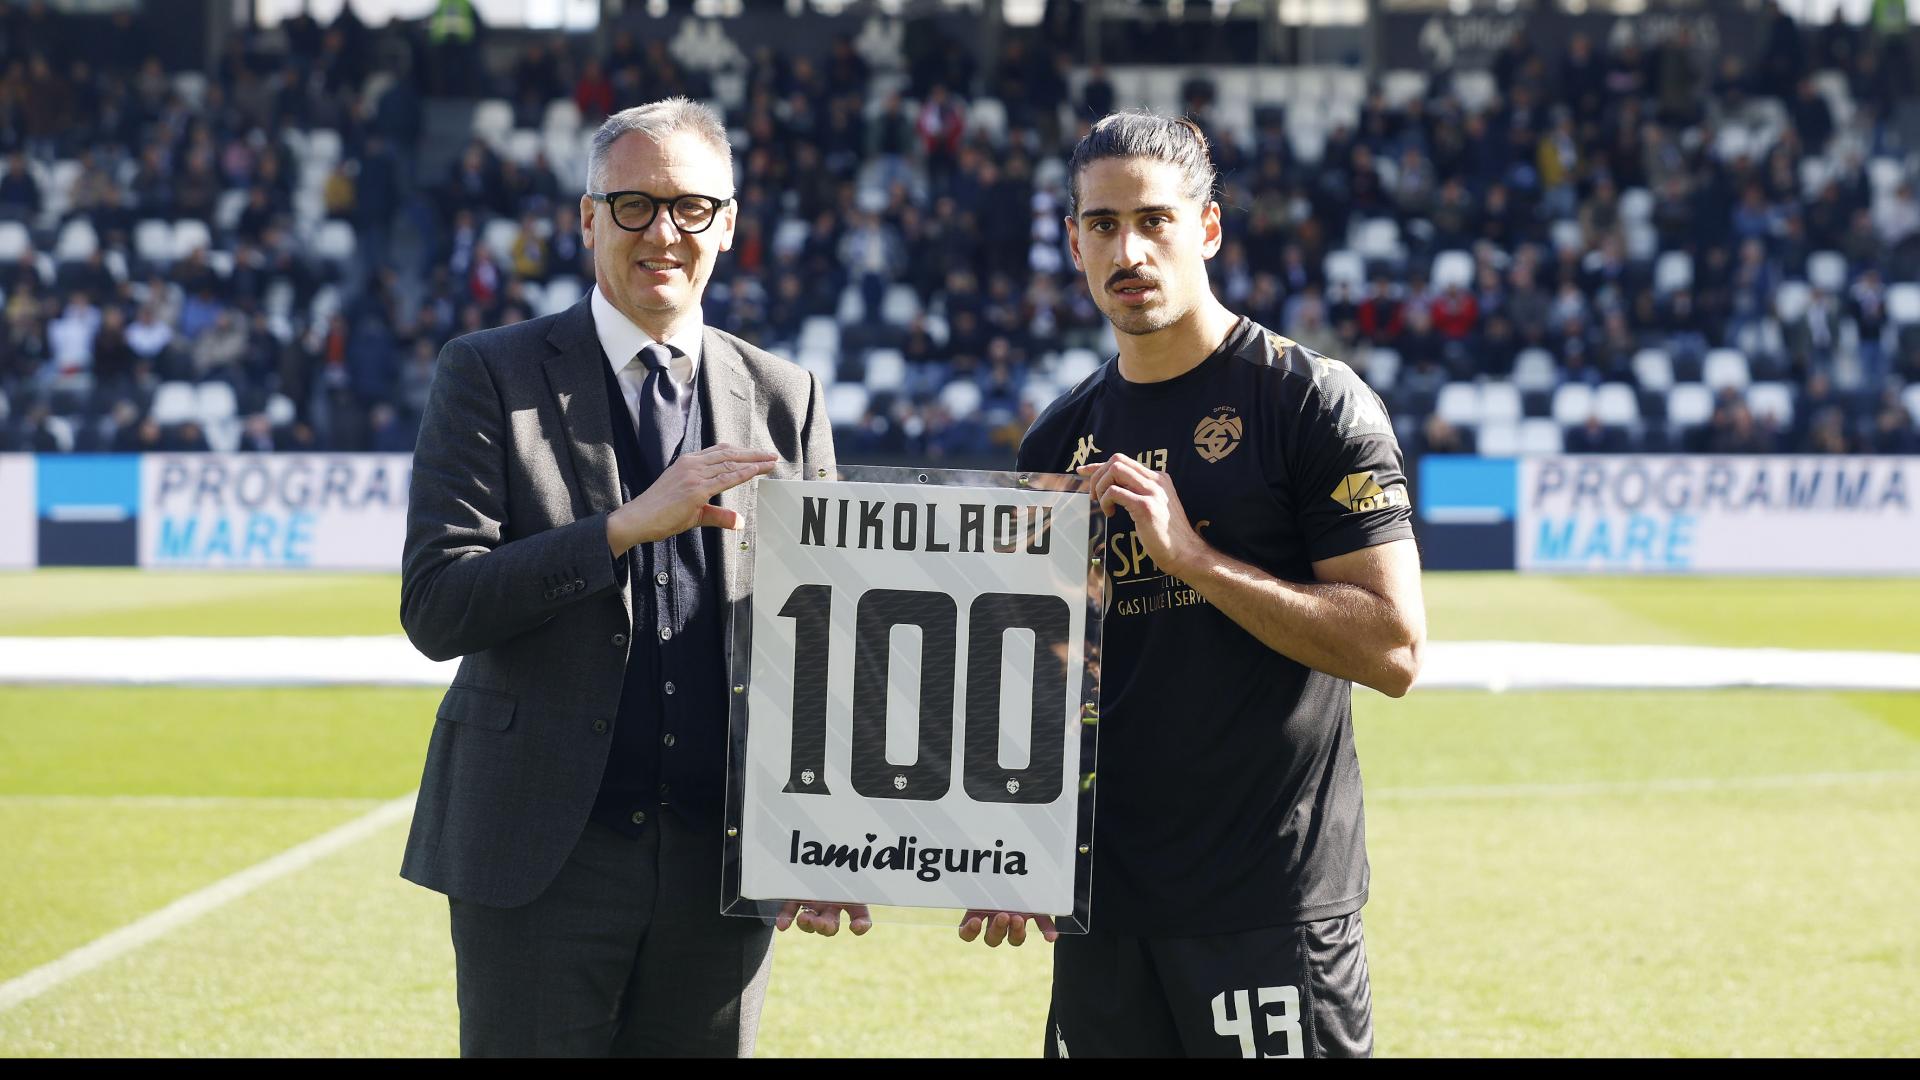 Nikolaou: "Honored by 100 appearances with this jersey"